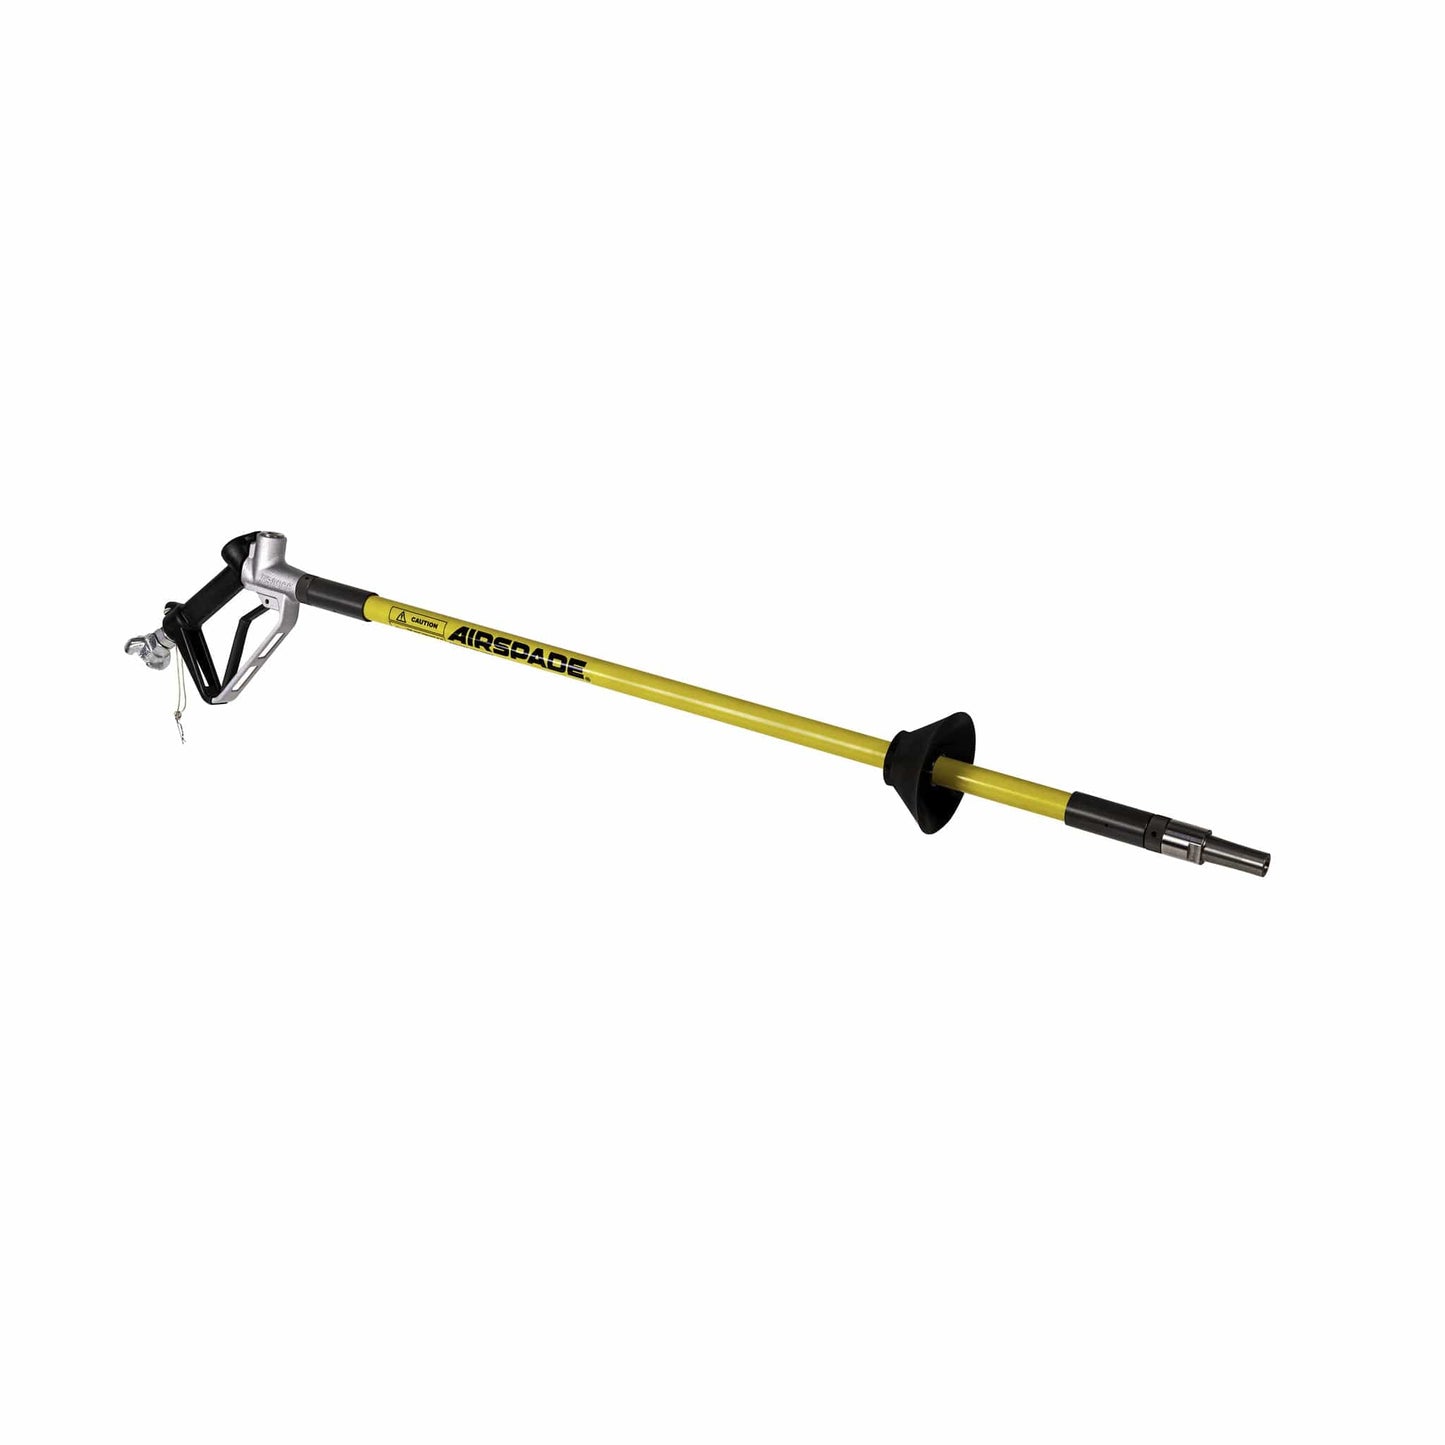 AirSpade 2000 Construction Kit - 225 cfm with 4 Ft Barrel & 3 Ft Extension (HT102)